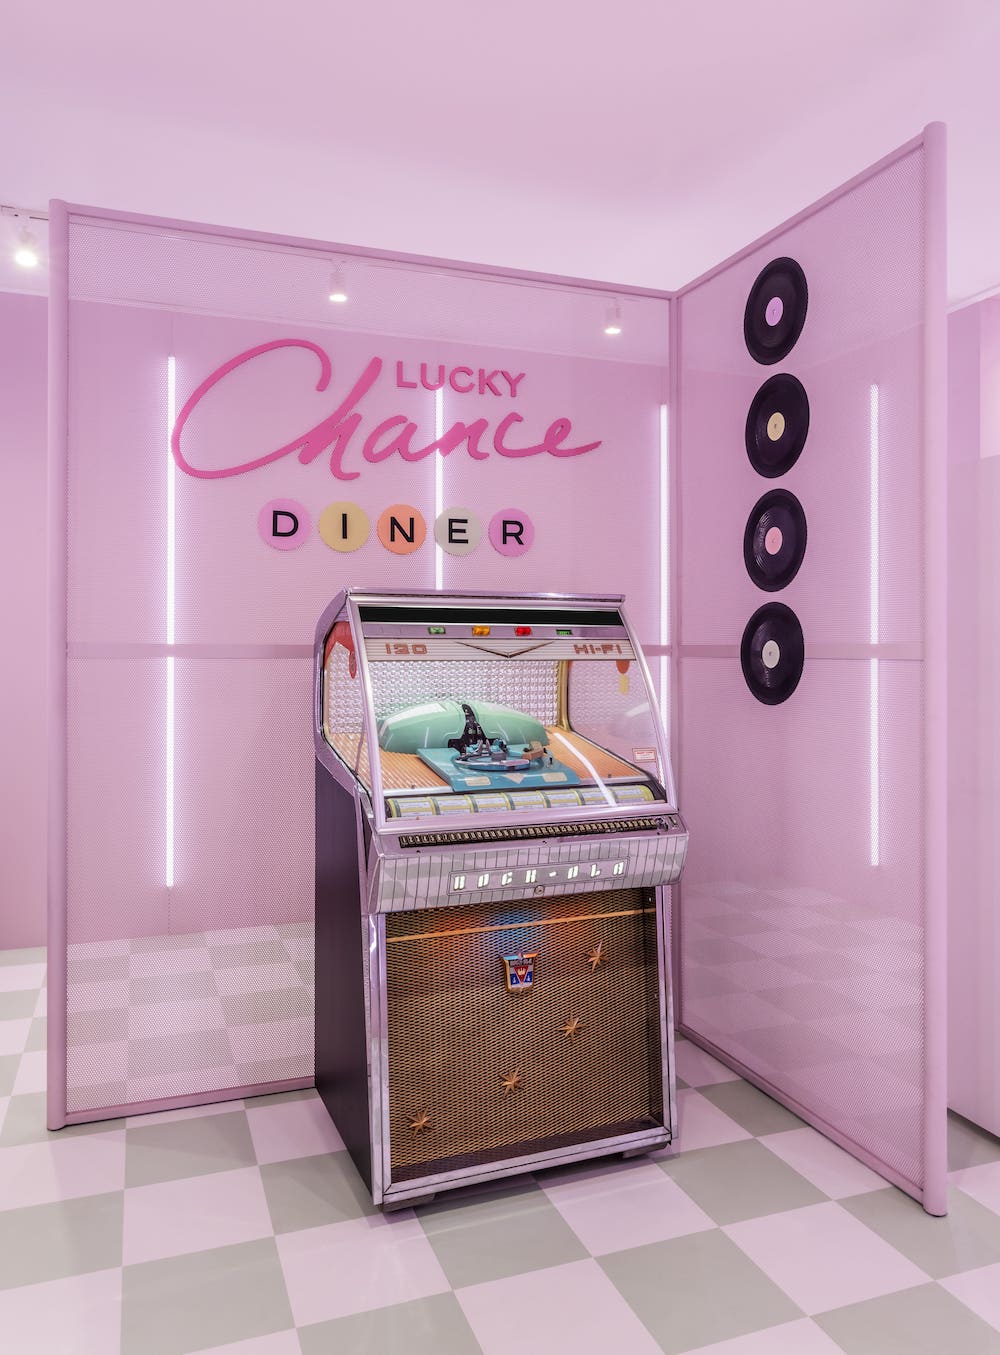 Chanel Lucky Chance Diner